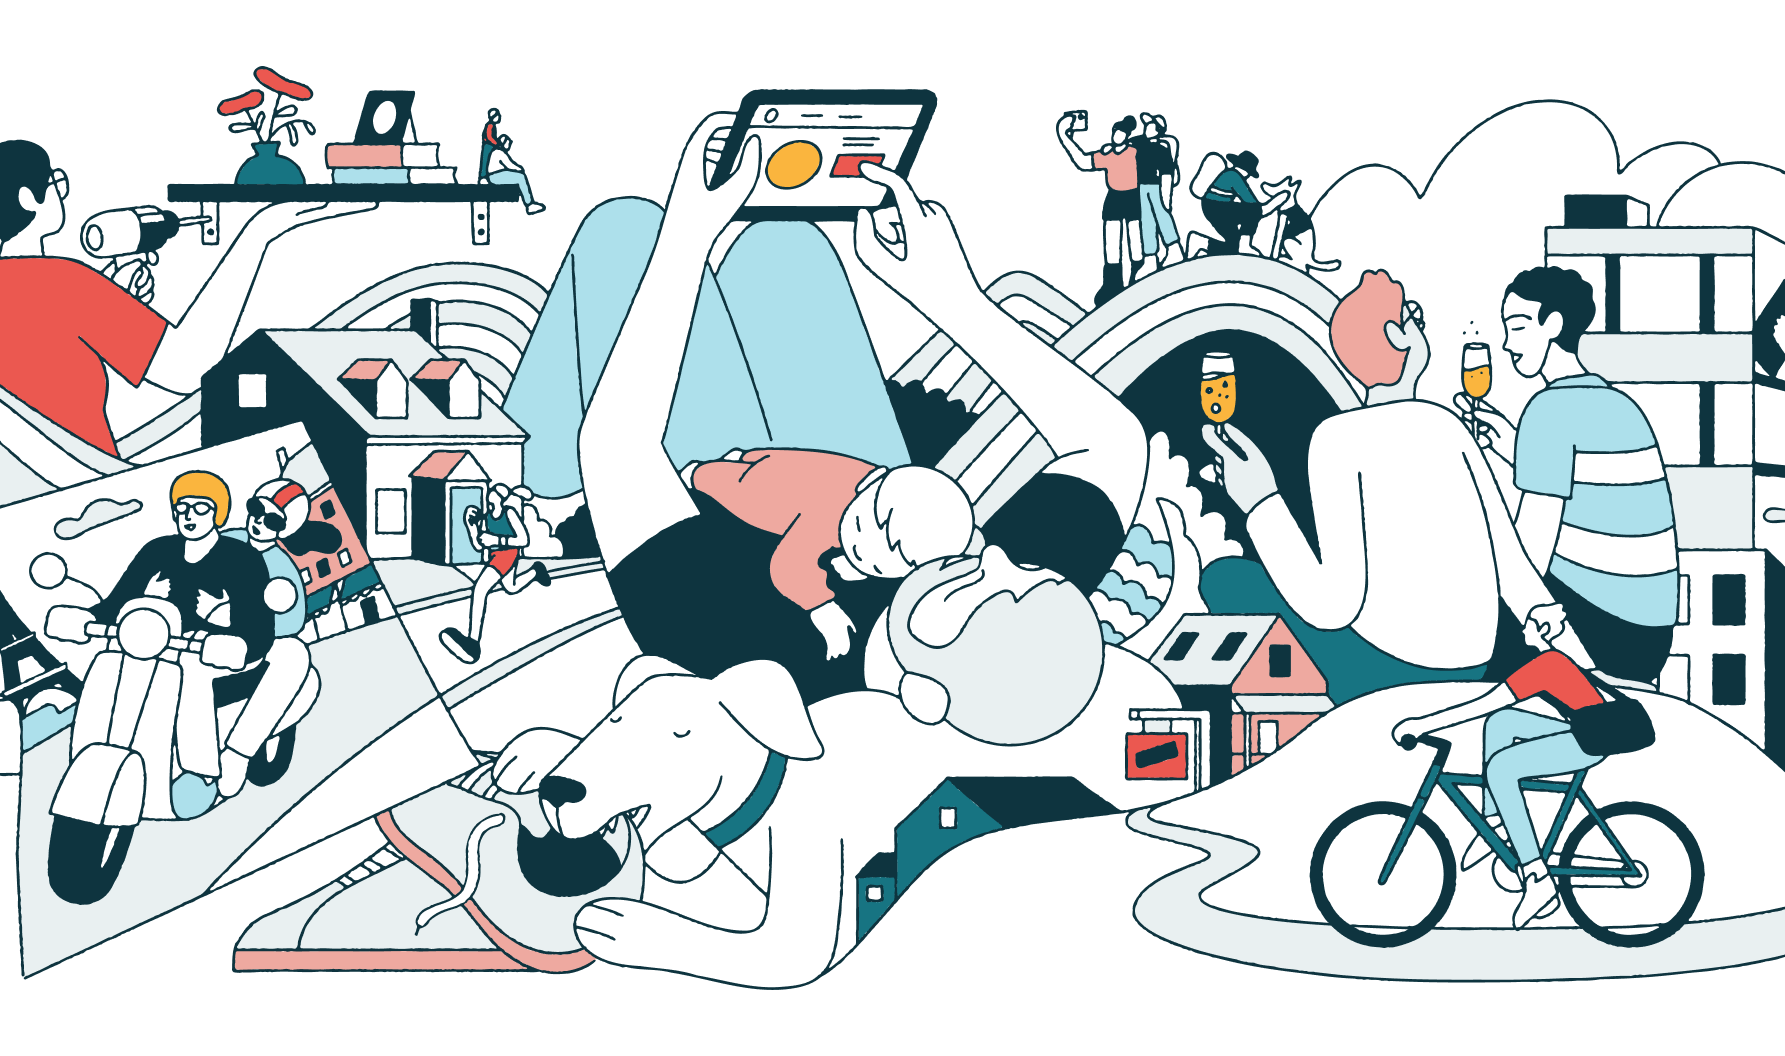 Illustration by Cristopher DeLorenzo for Bestow portraying people engaged in everyday activities